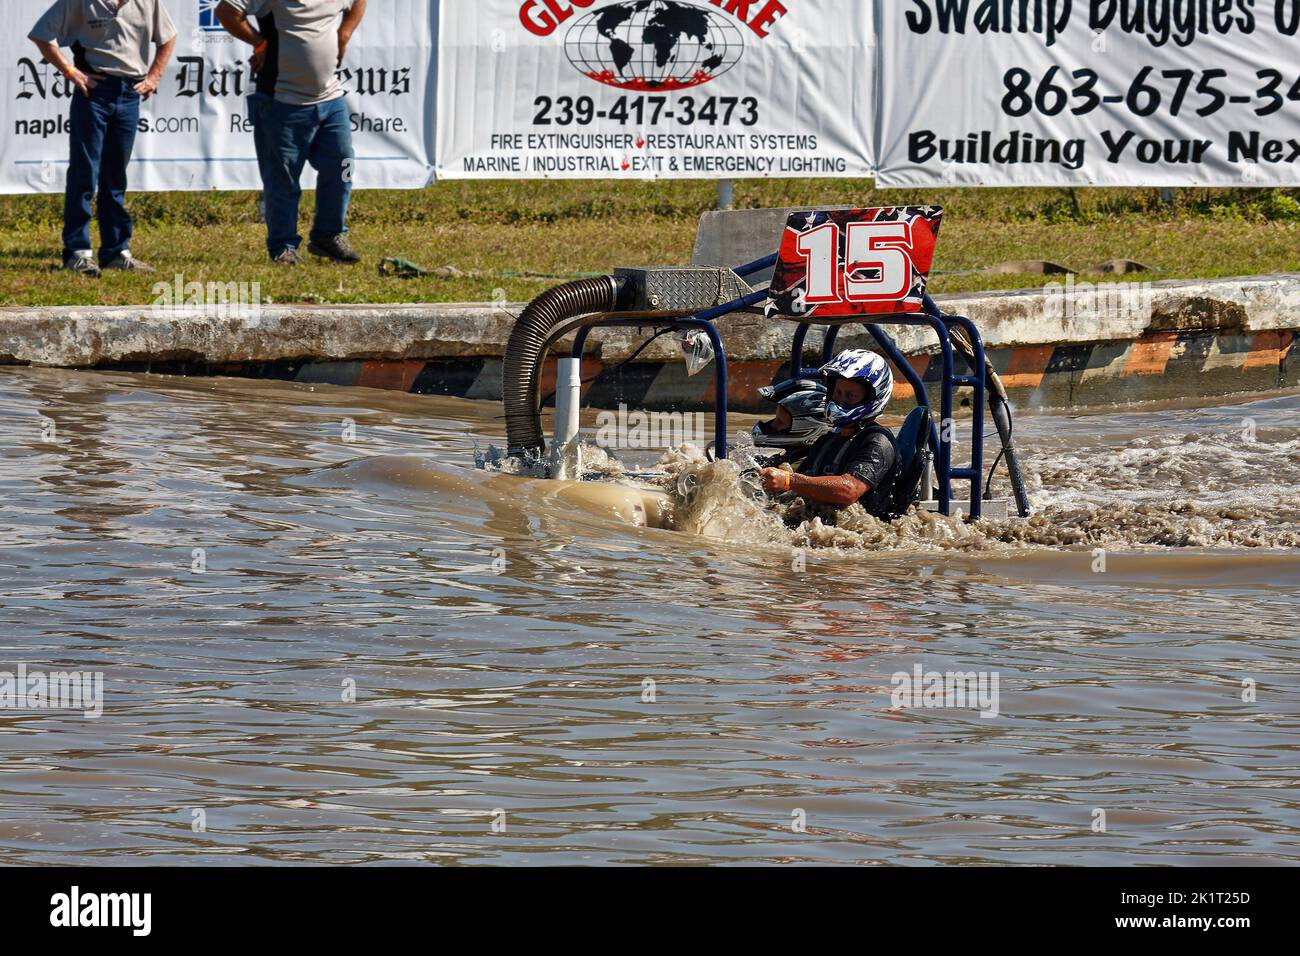 swamp buggy moving through water, action, half submerged, jeep style, vehicle sport, close-up, man, woman, helmets, advertising banners, Florida Sport Stock Photo